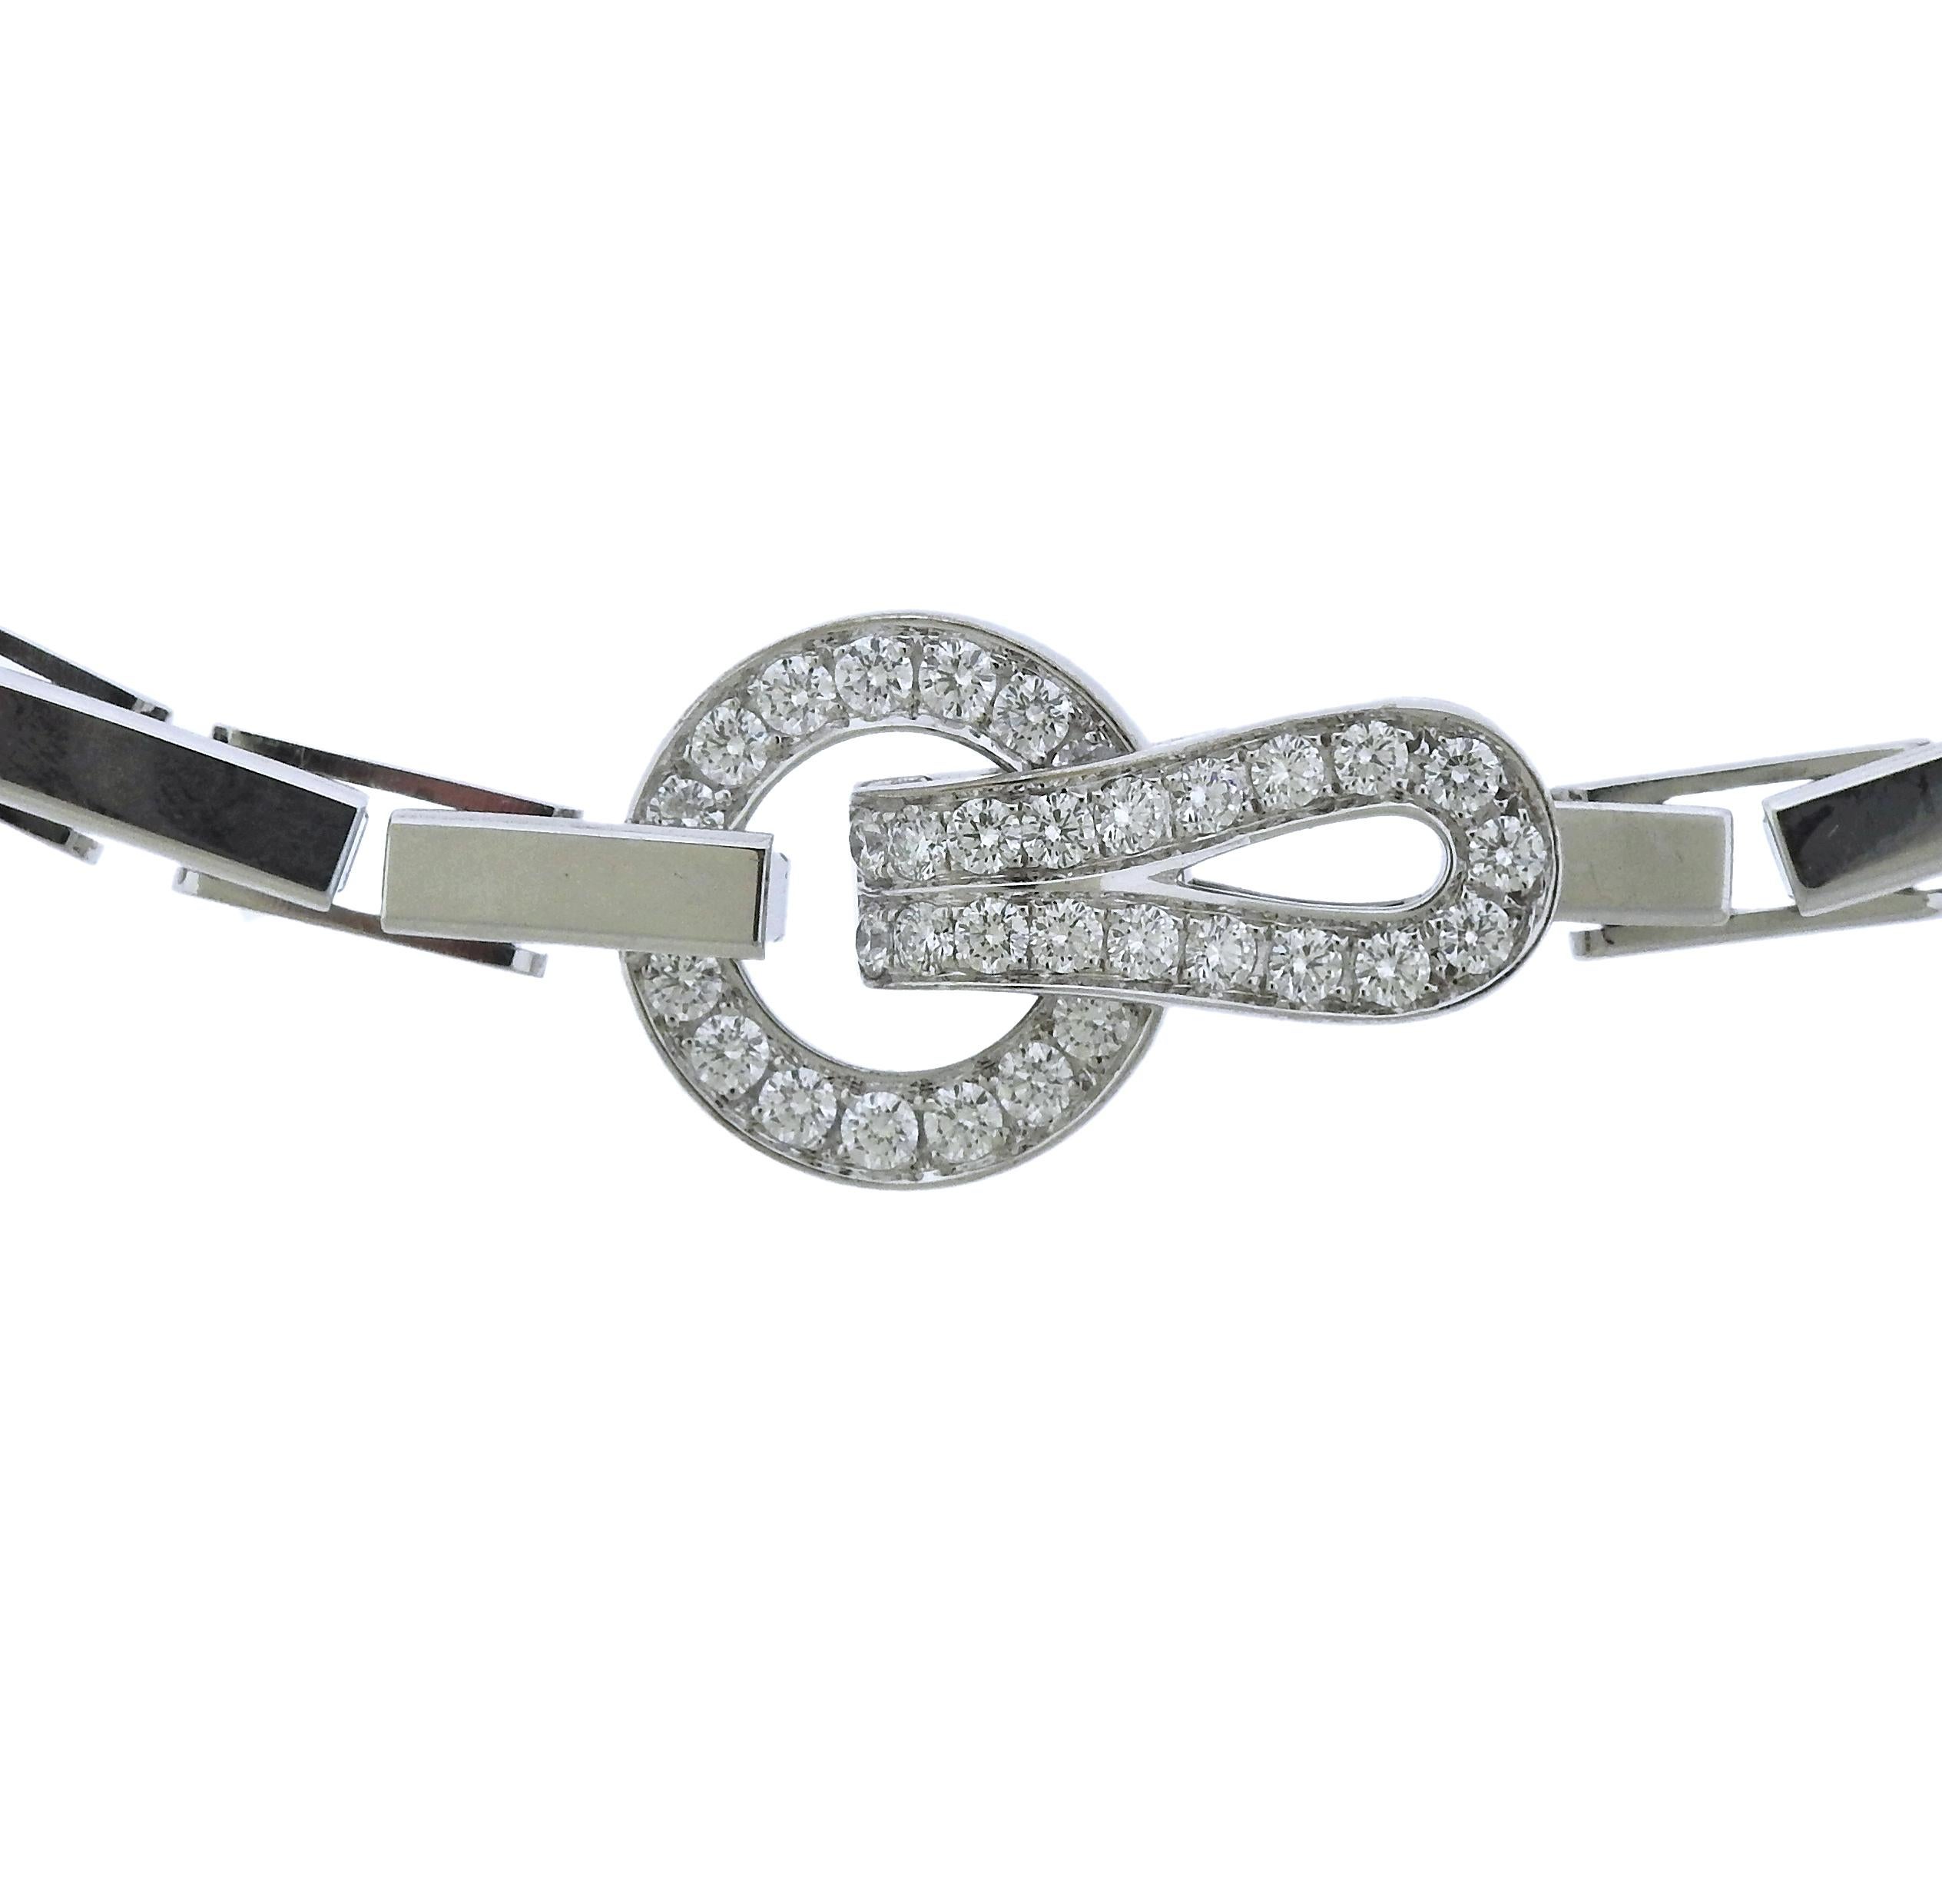  Classic  18k white gold Agrafe necklace by Cartier, adorned with approximately 1.36ctw in G/VS diamonds. Necklace is 16 3/4